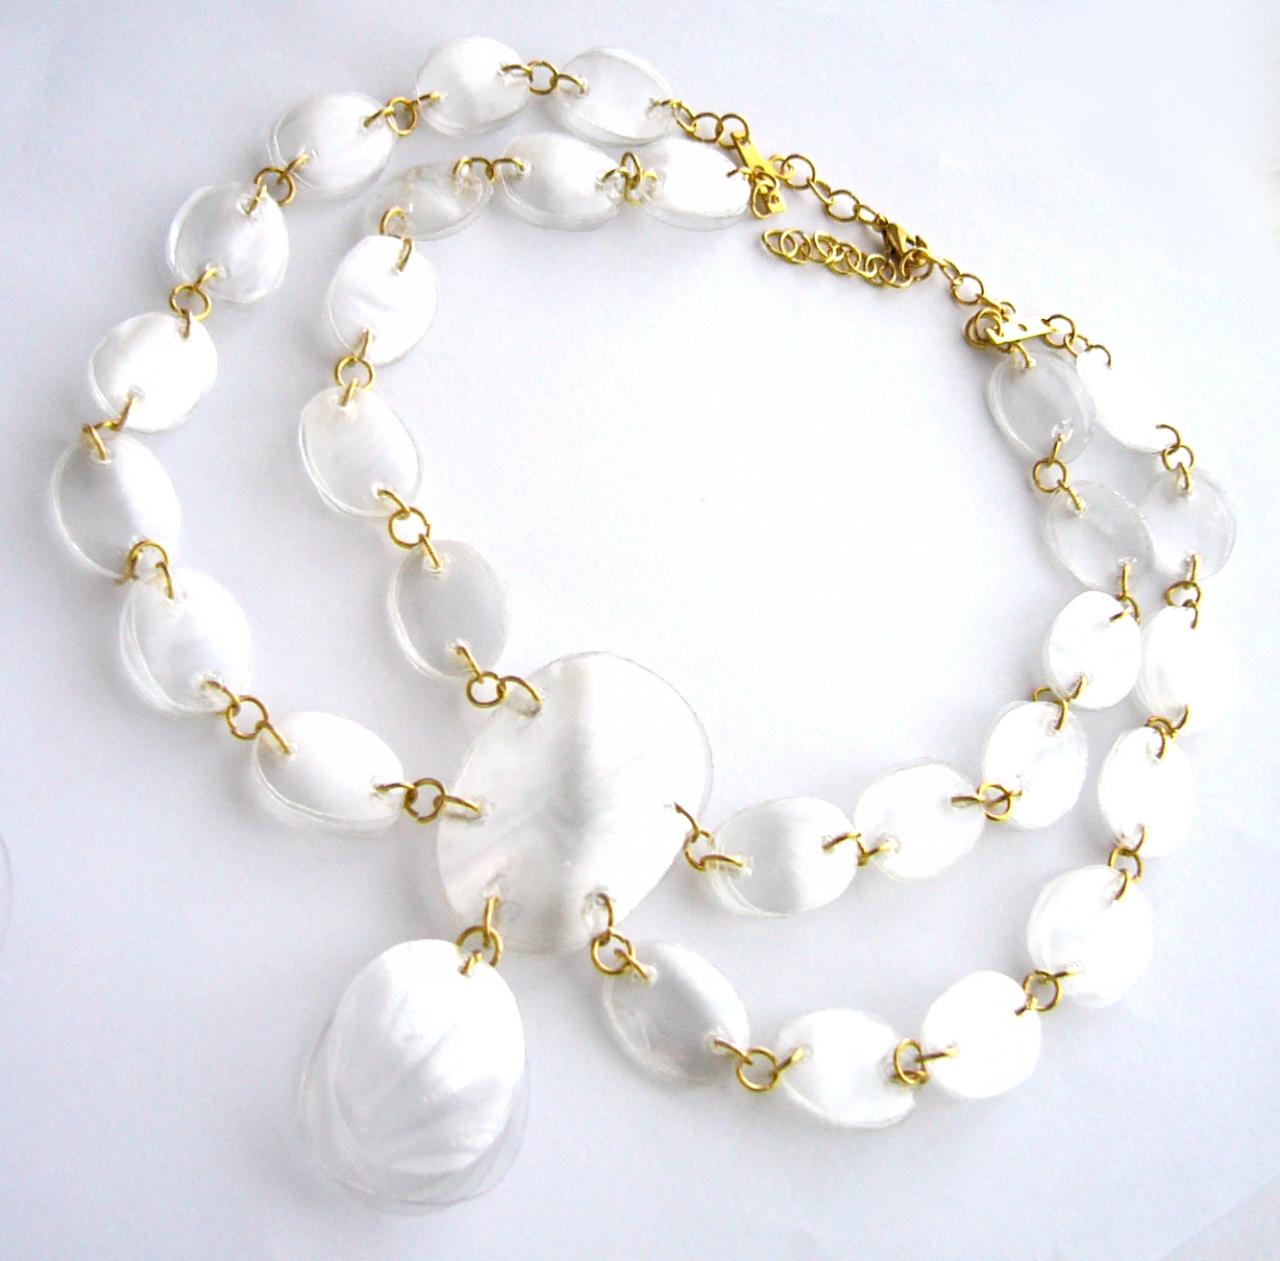 White & Gold Statement Necklace Handmade Of Recycled Plastic Bottles - Upcycled, Handcrafted Jewelry, Chunky Necklace